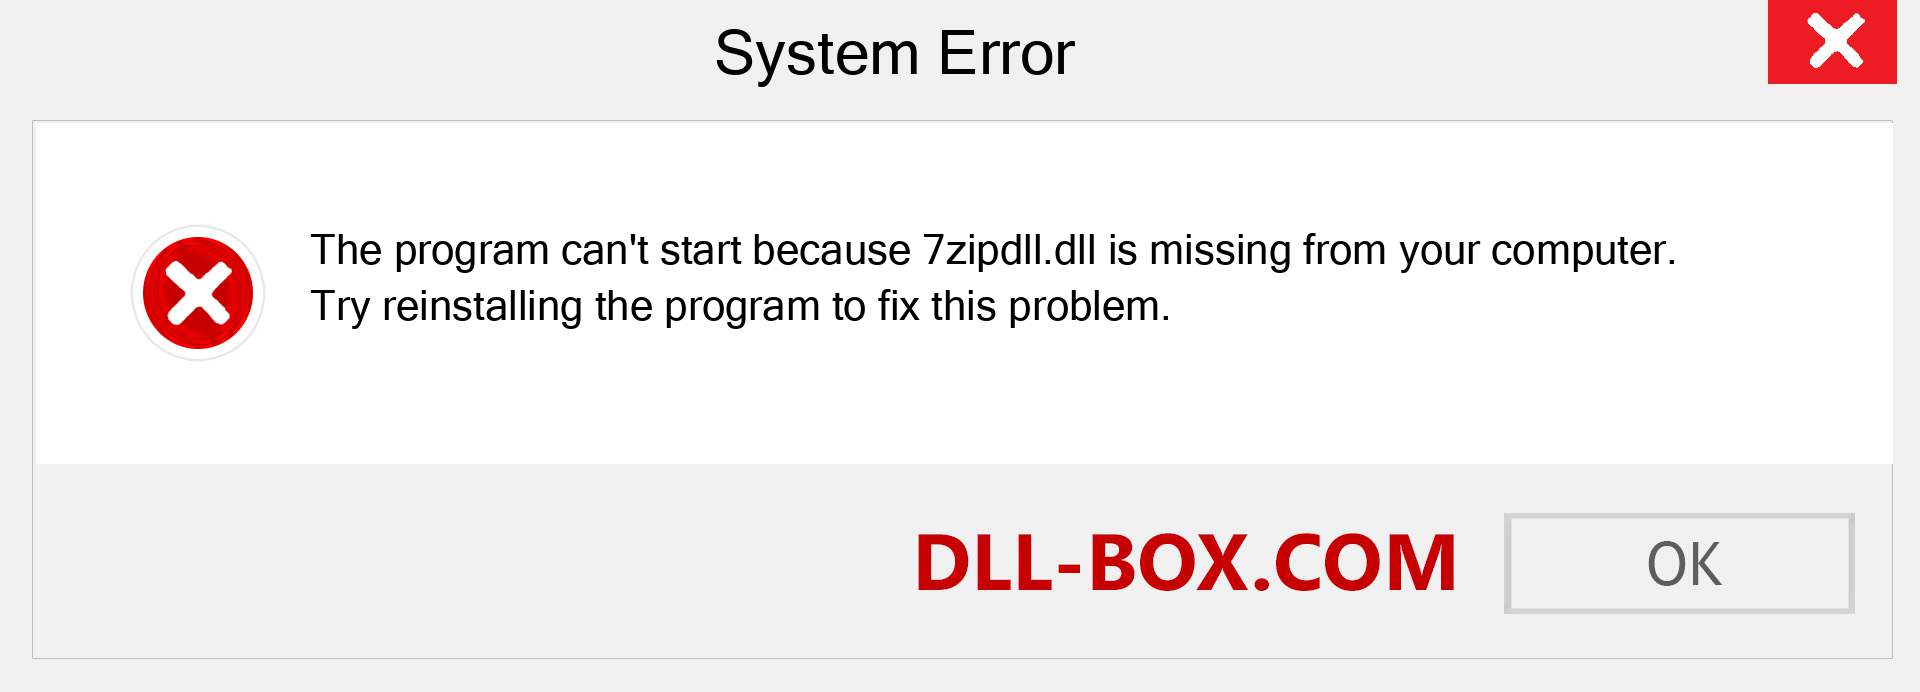  7zipdll.dll file is missing?. Download for Windows 7, 8, 10 - Fix  7zipdll dll Missing Error on Windows, photos, images